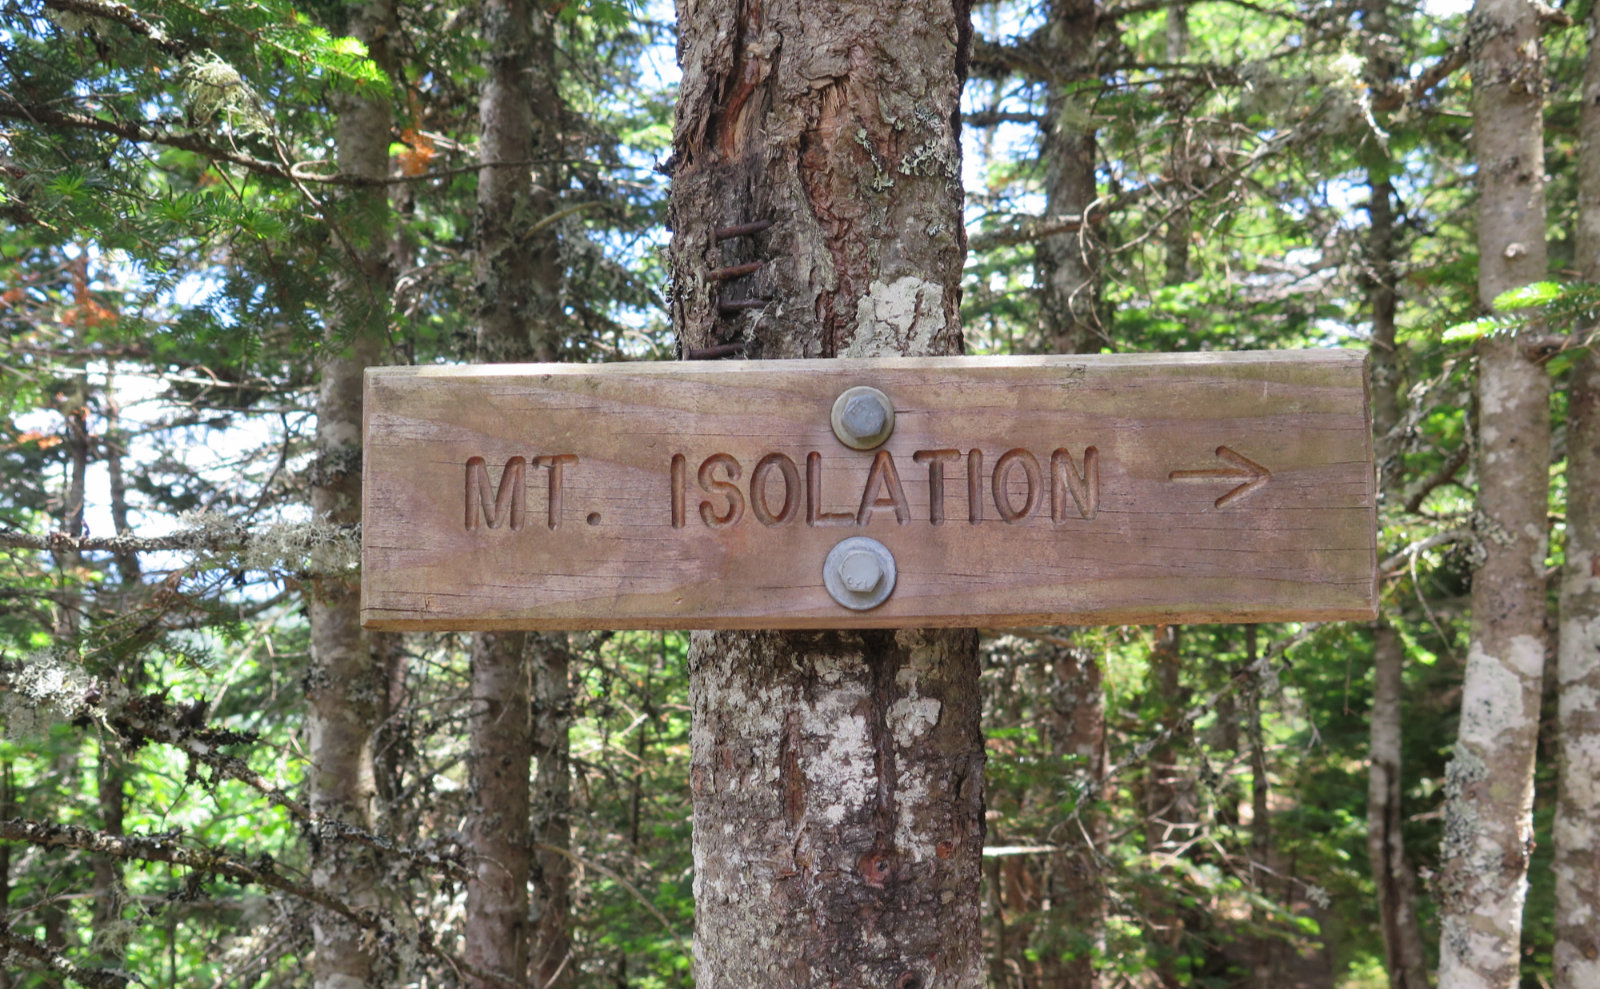 Trail sign for Mt Isolation